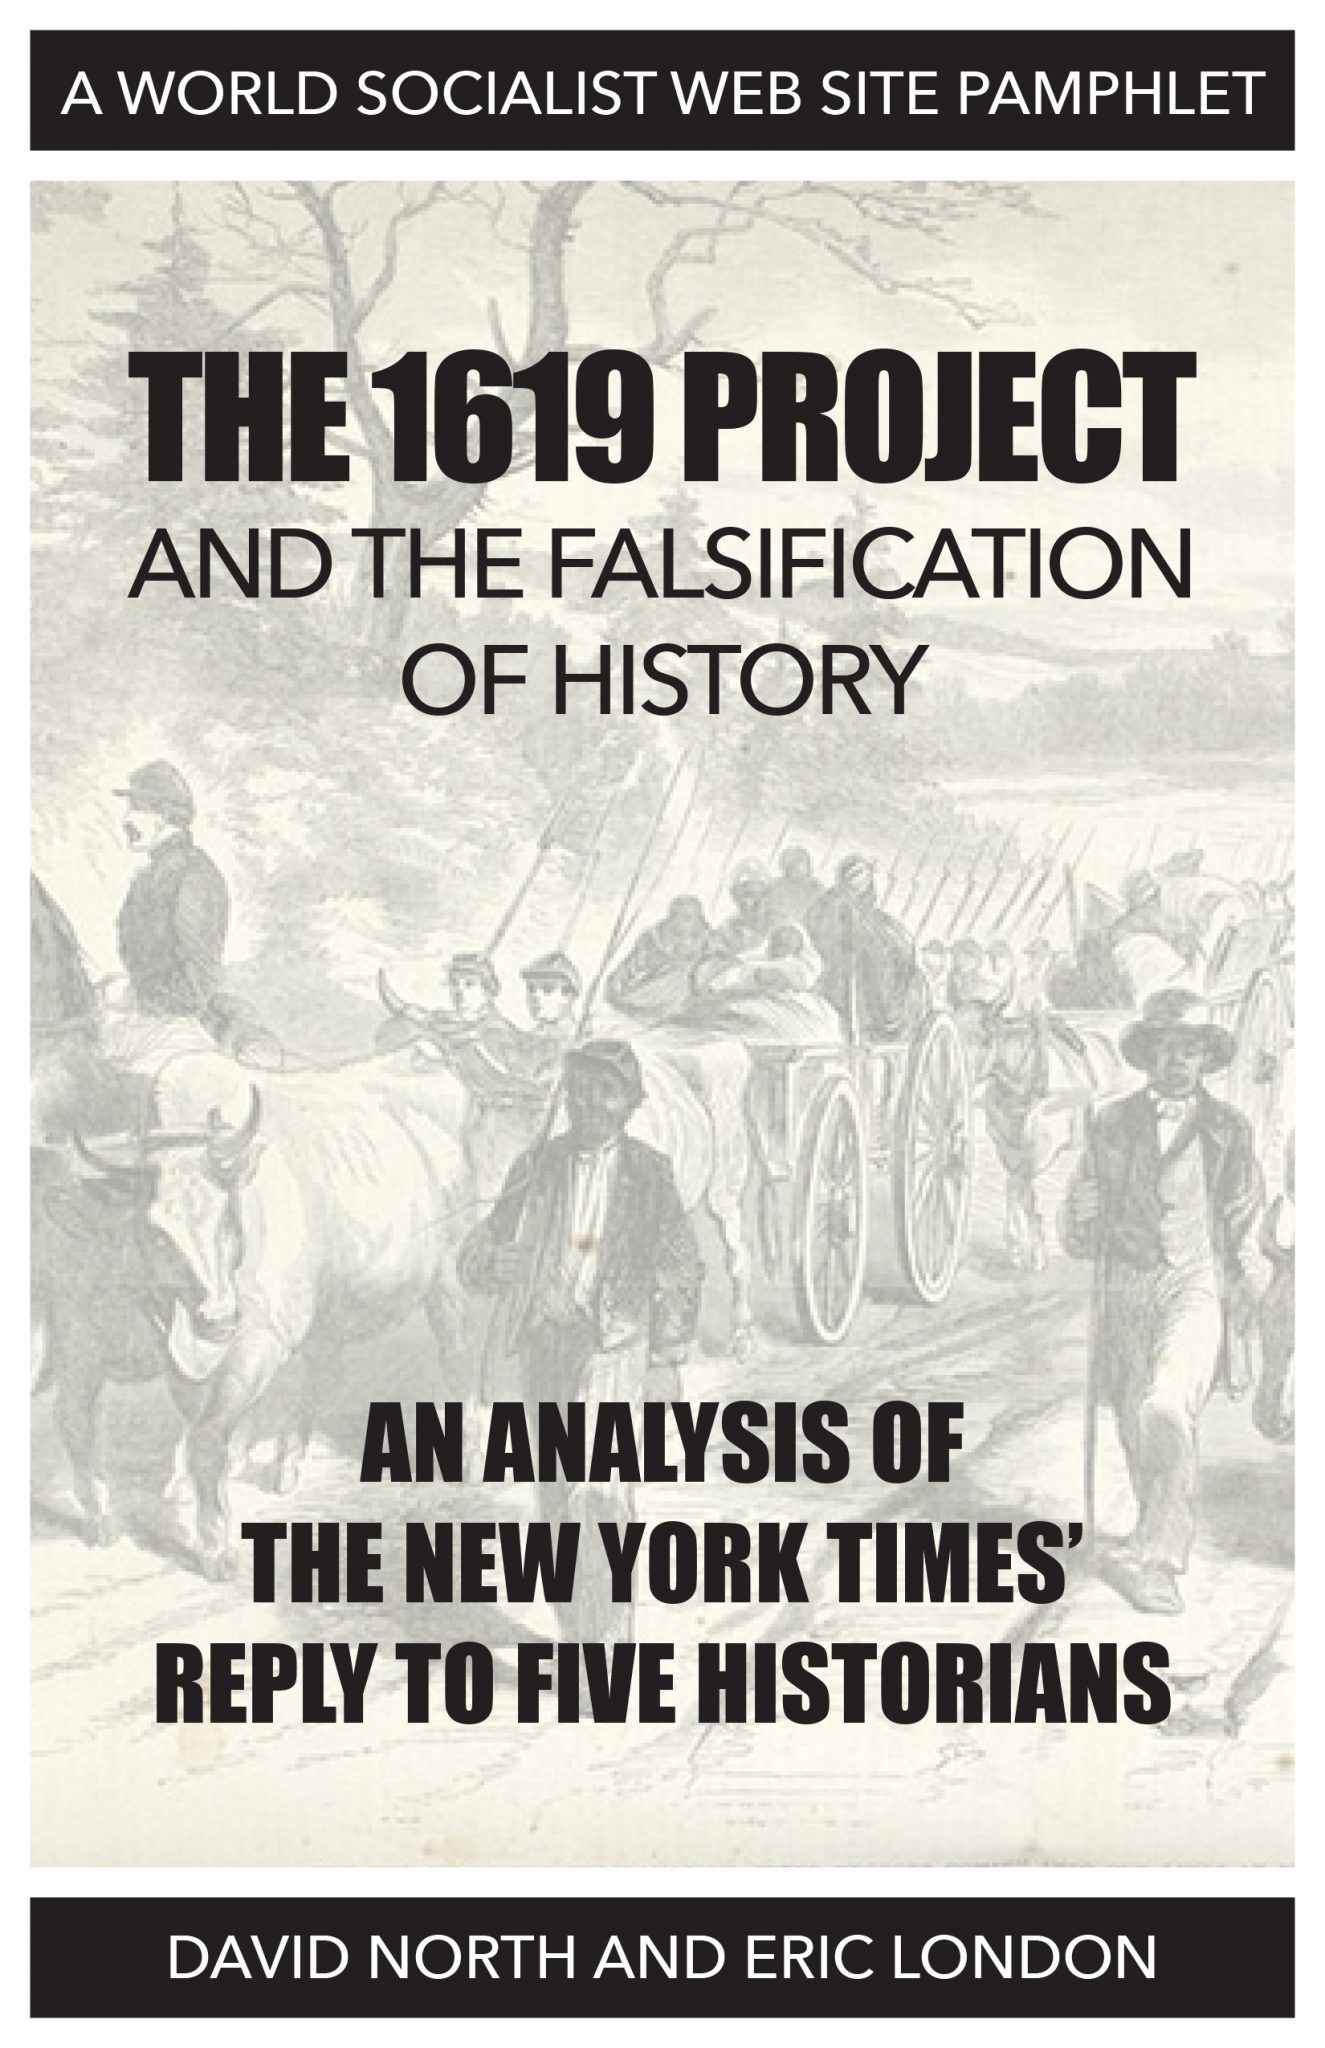 the 1619 project about